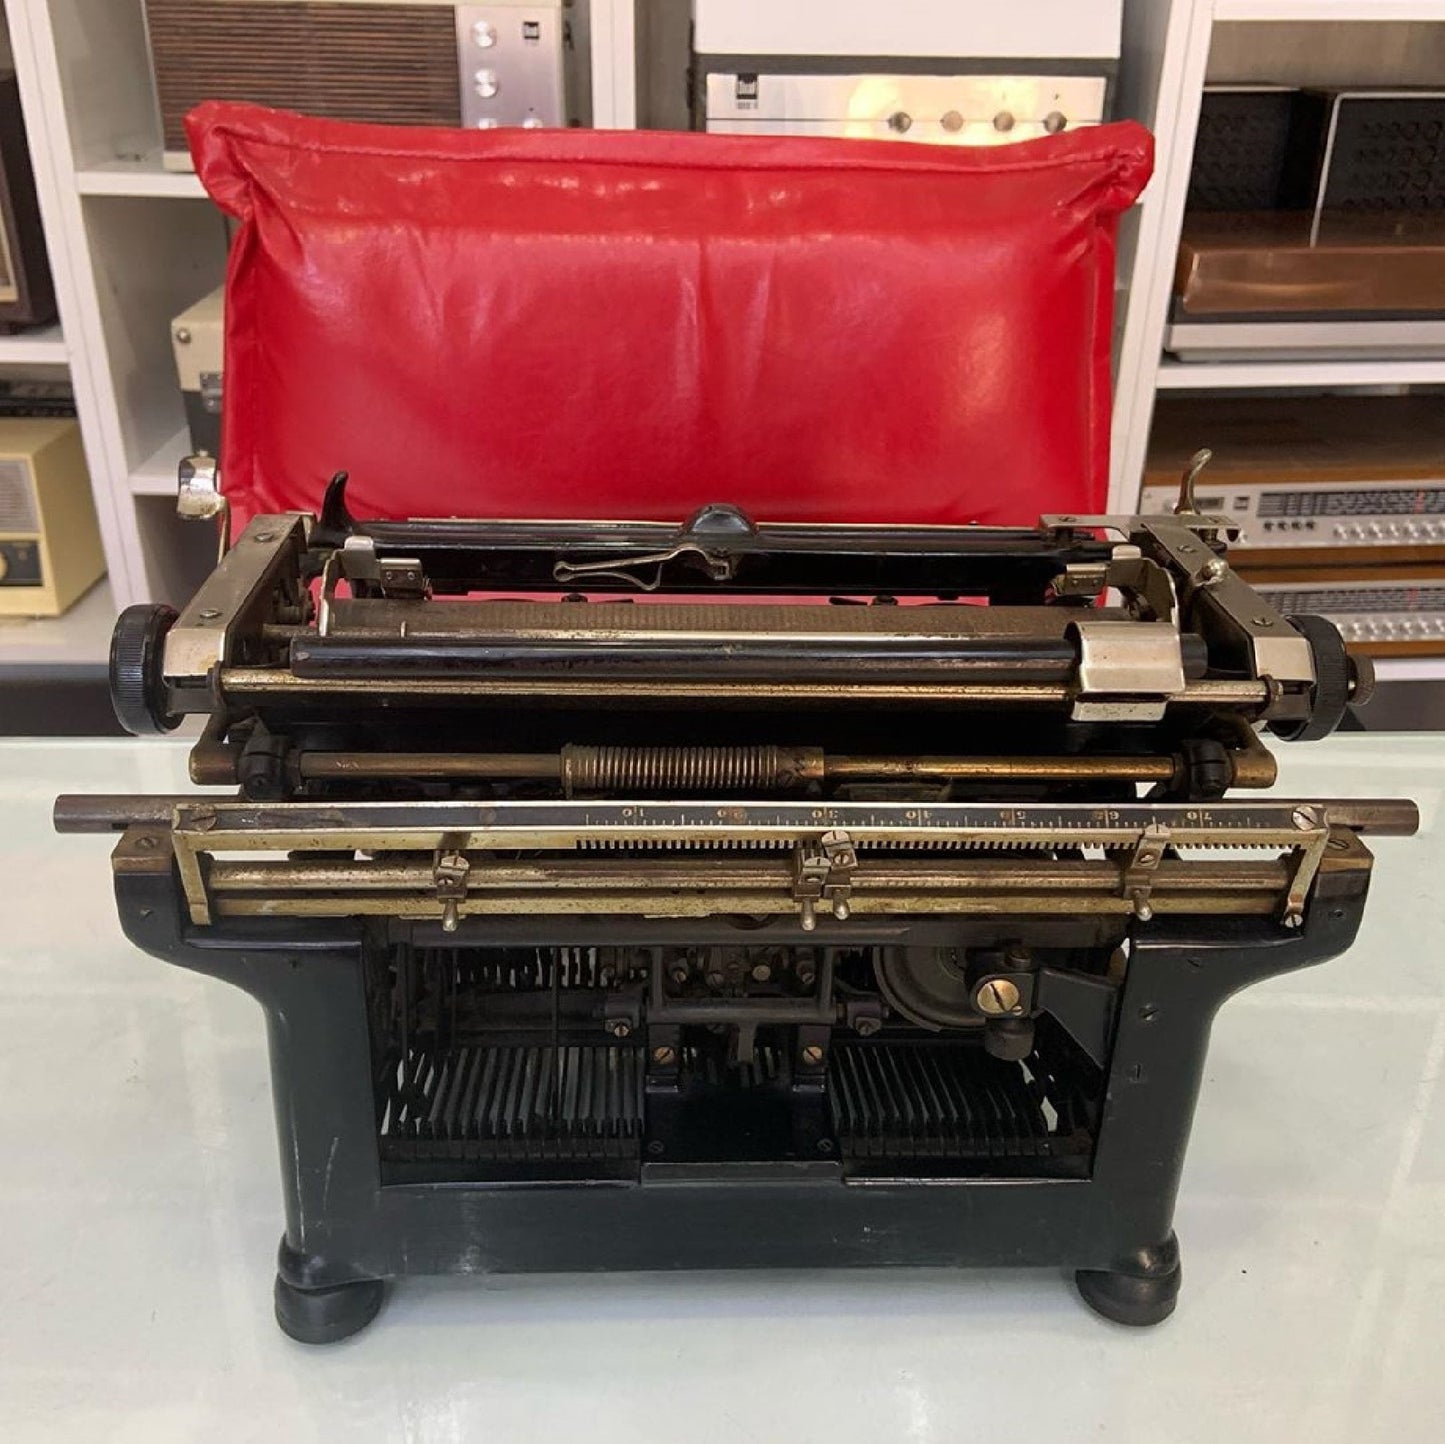 Underwood Typewriter - Antique Elegance, Perfectly Functional, an Exquisite Gift